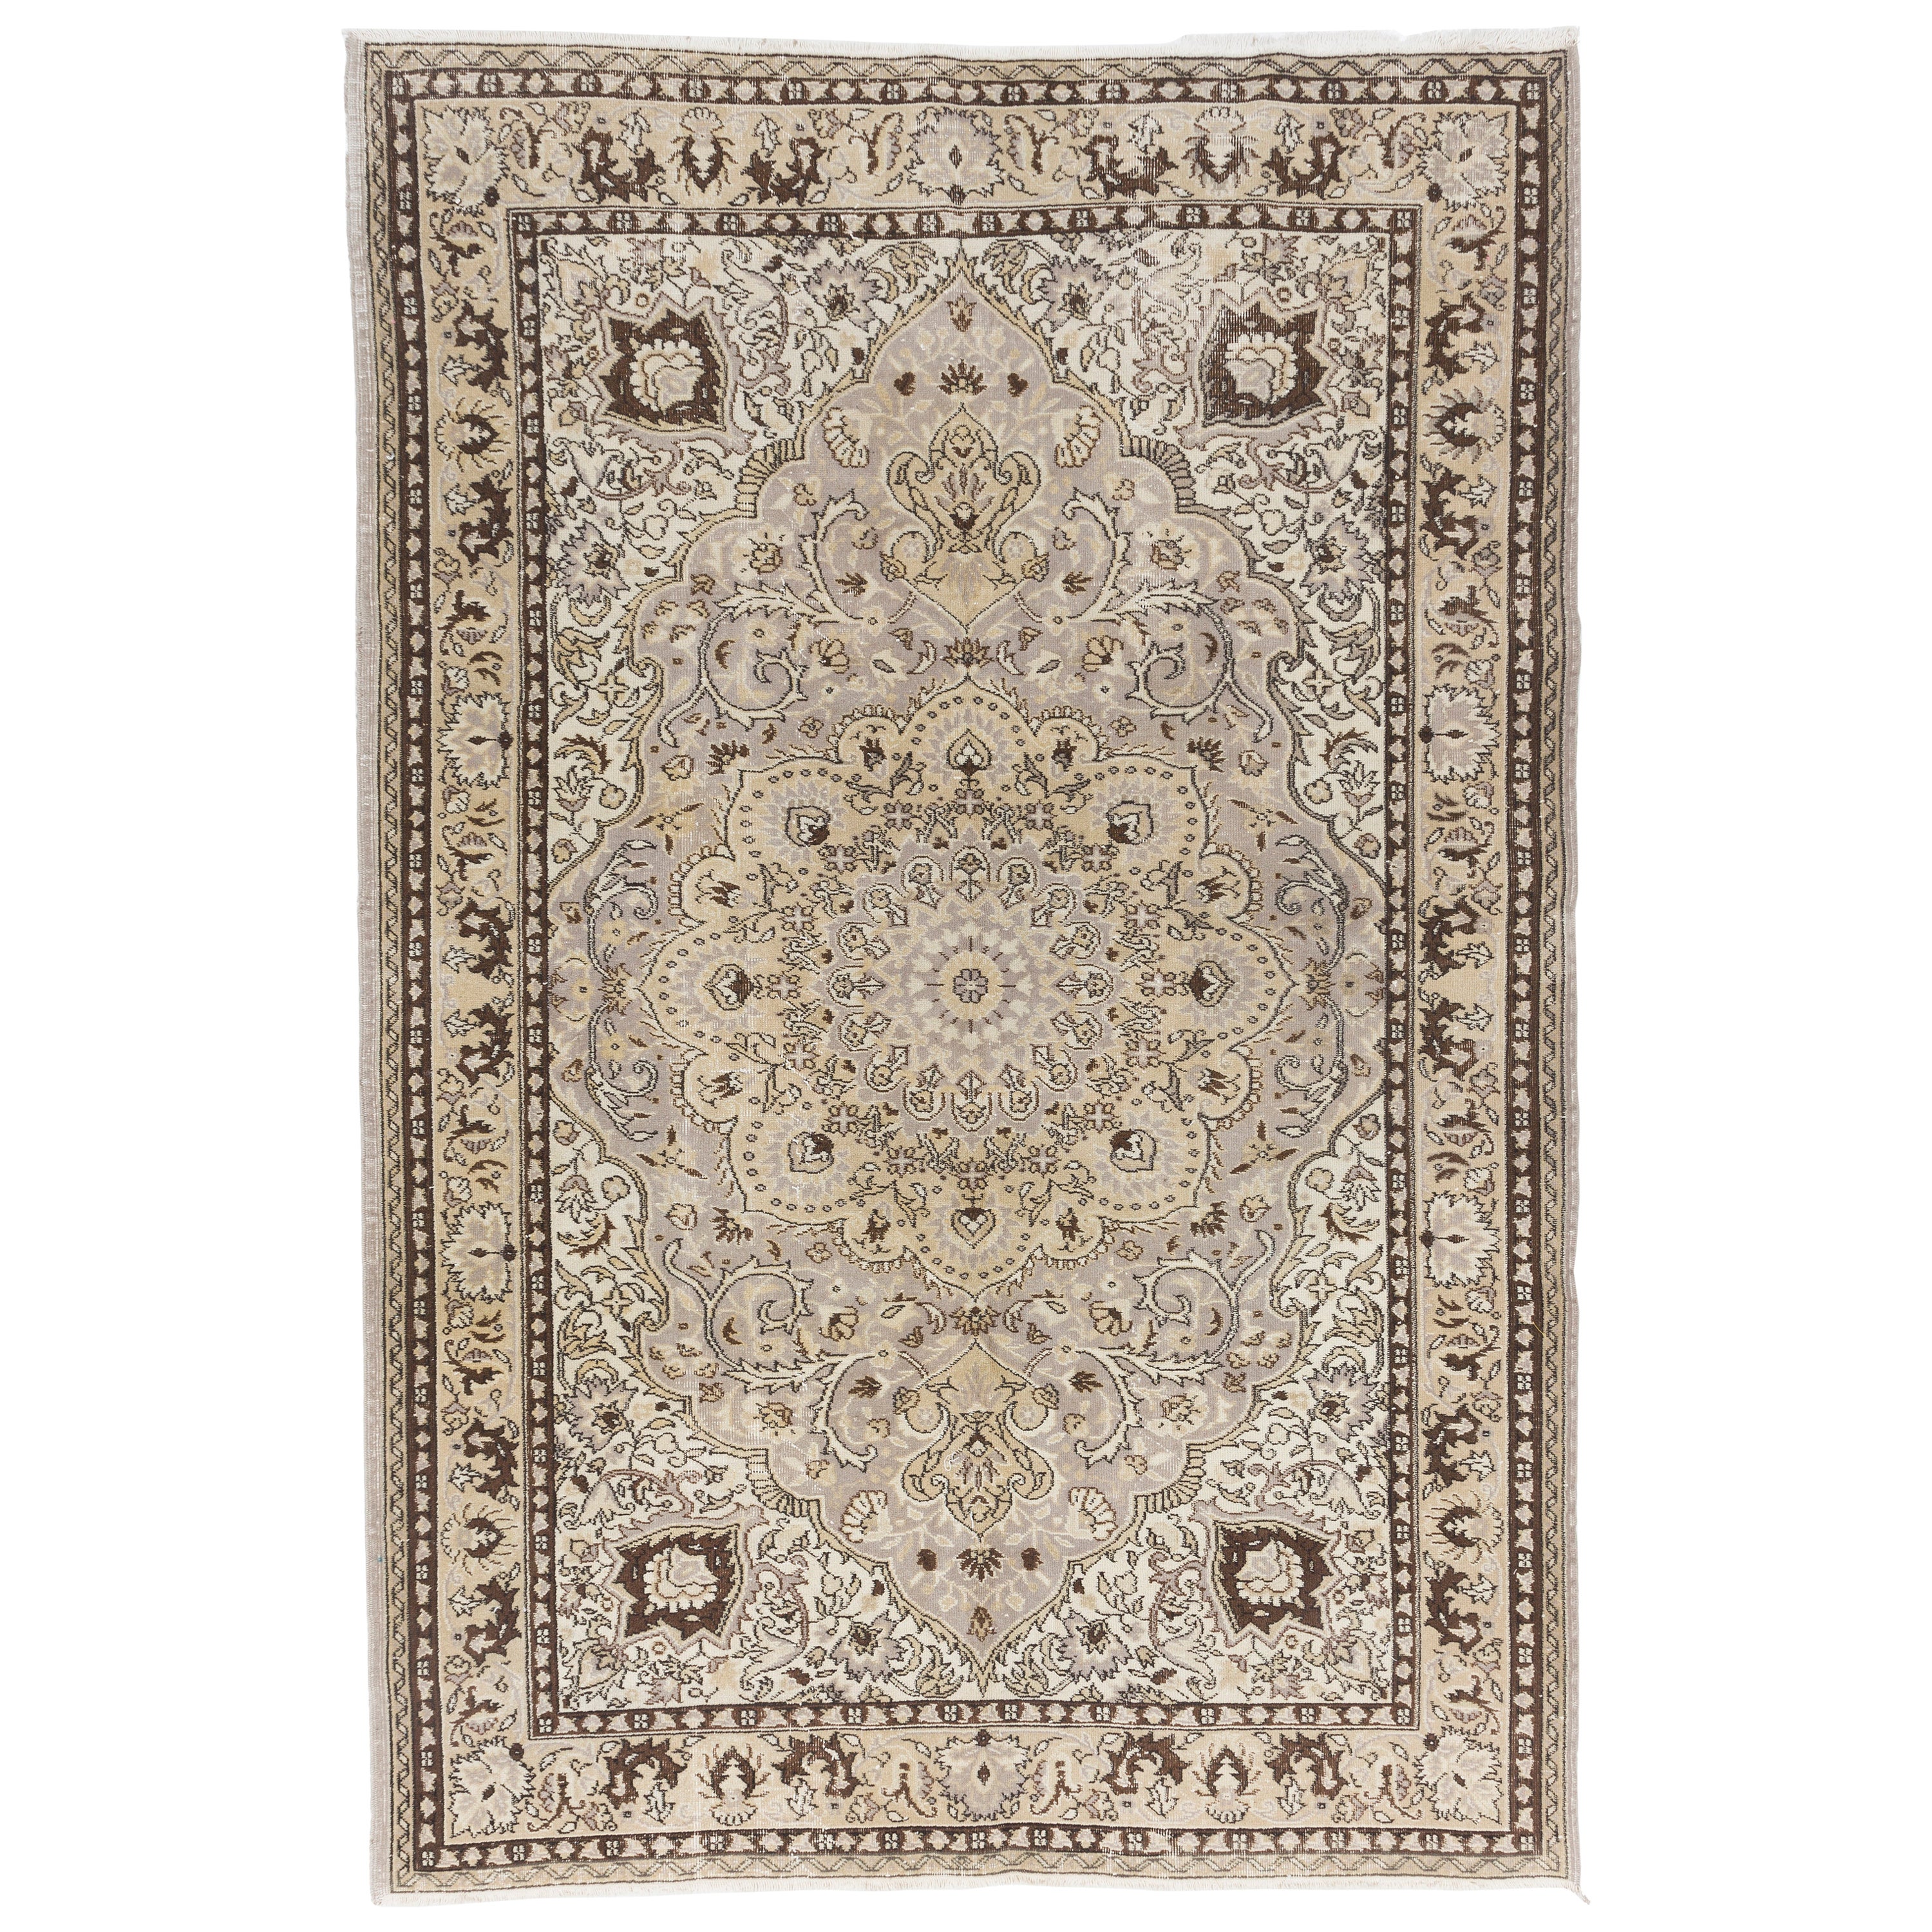 6.8x10 Ft Handmade Anatolian Area Rug in Neutral Colors, Vintage Carpet in Beige For Sale